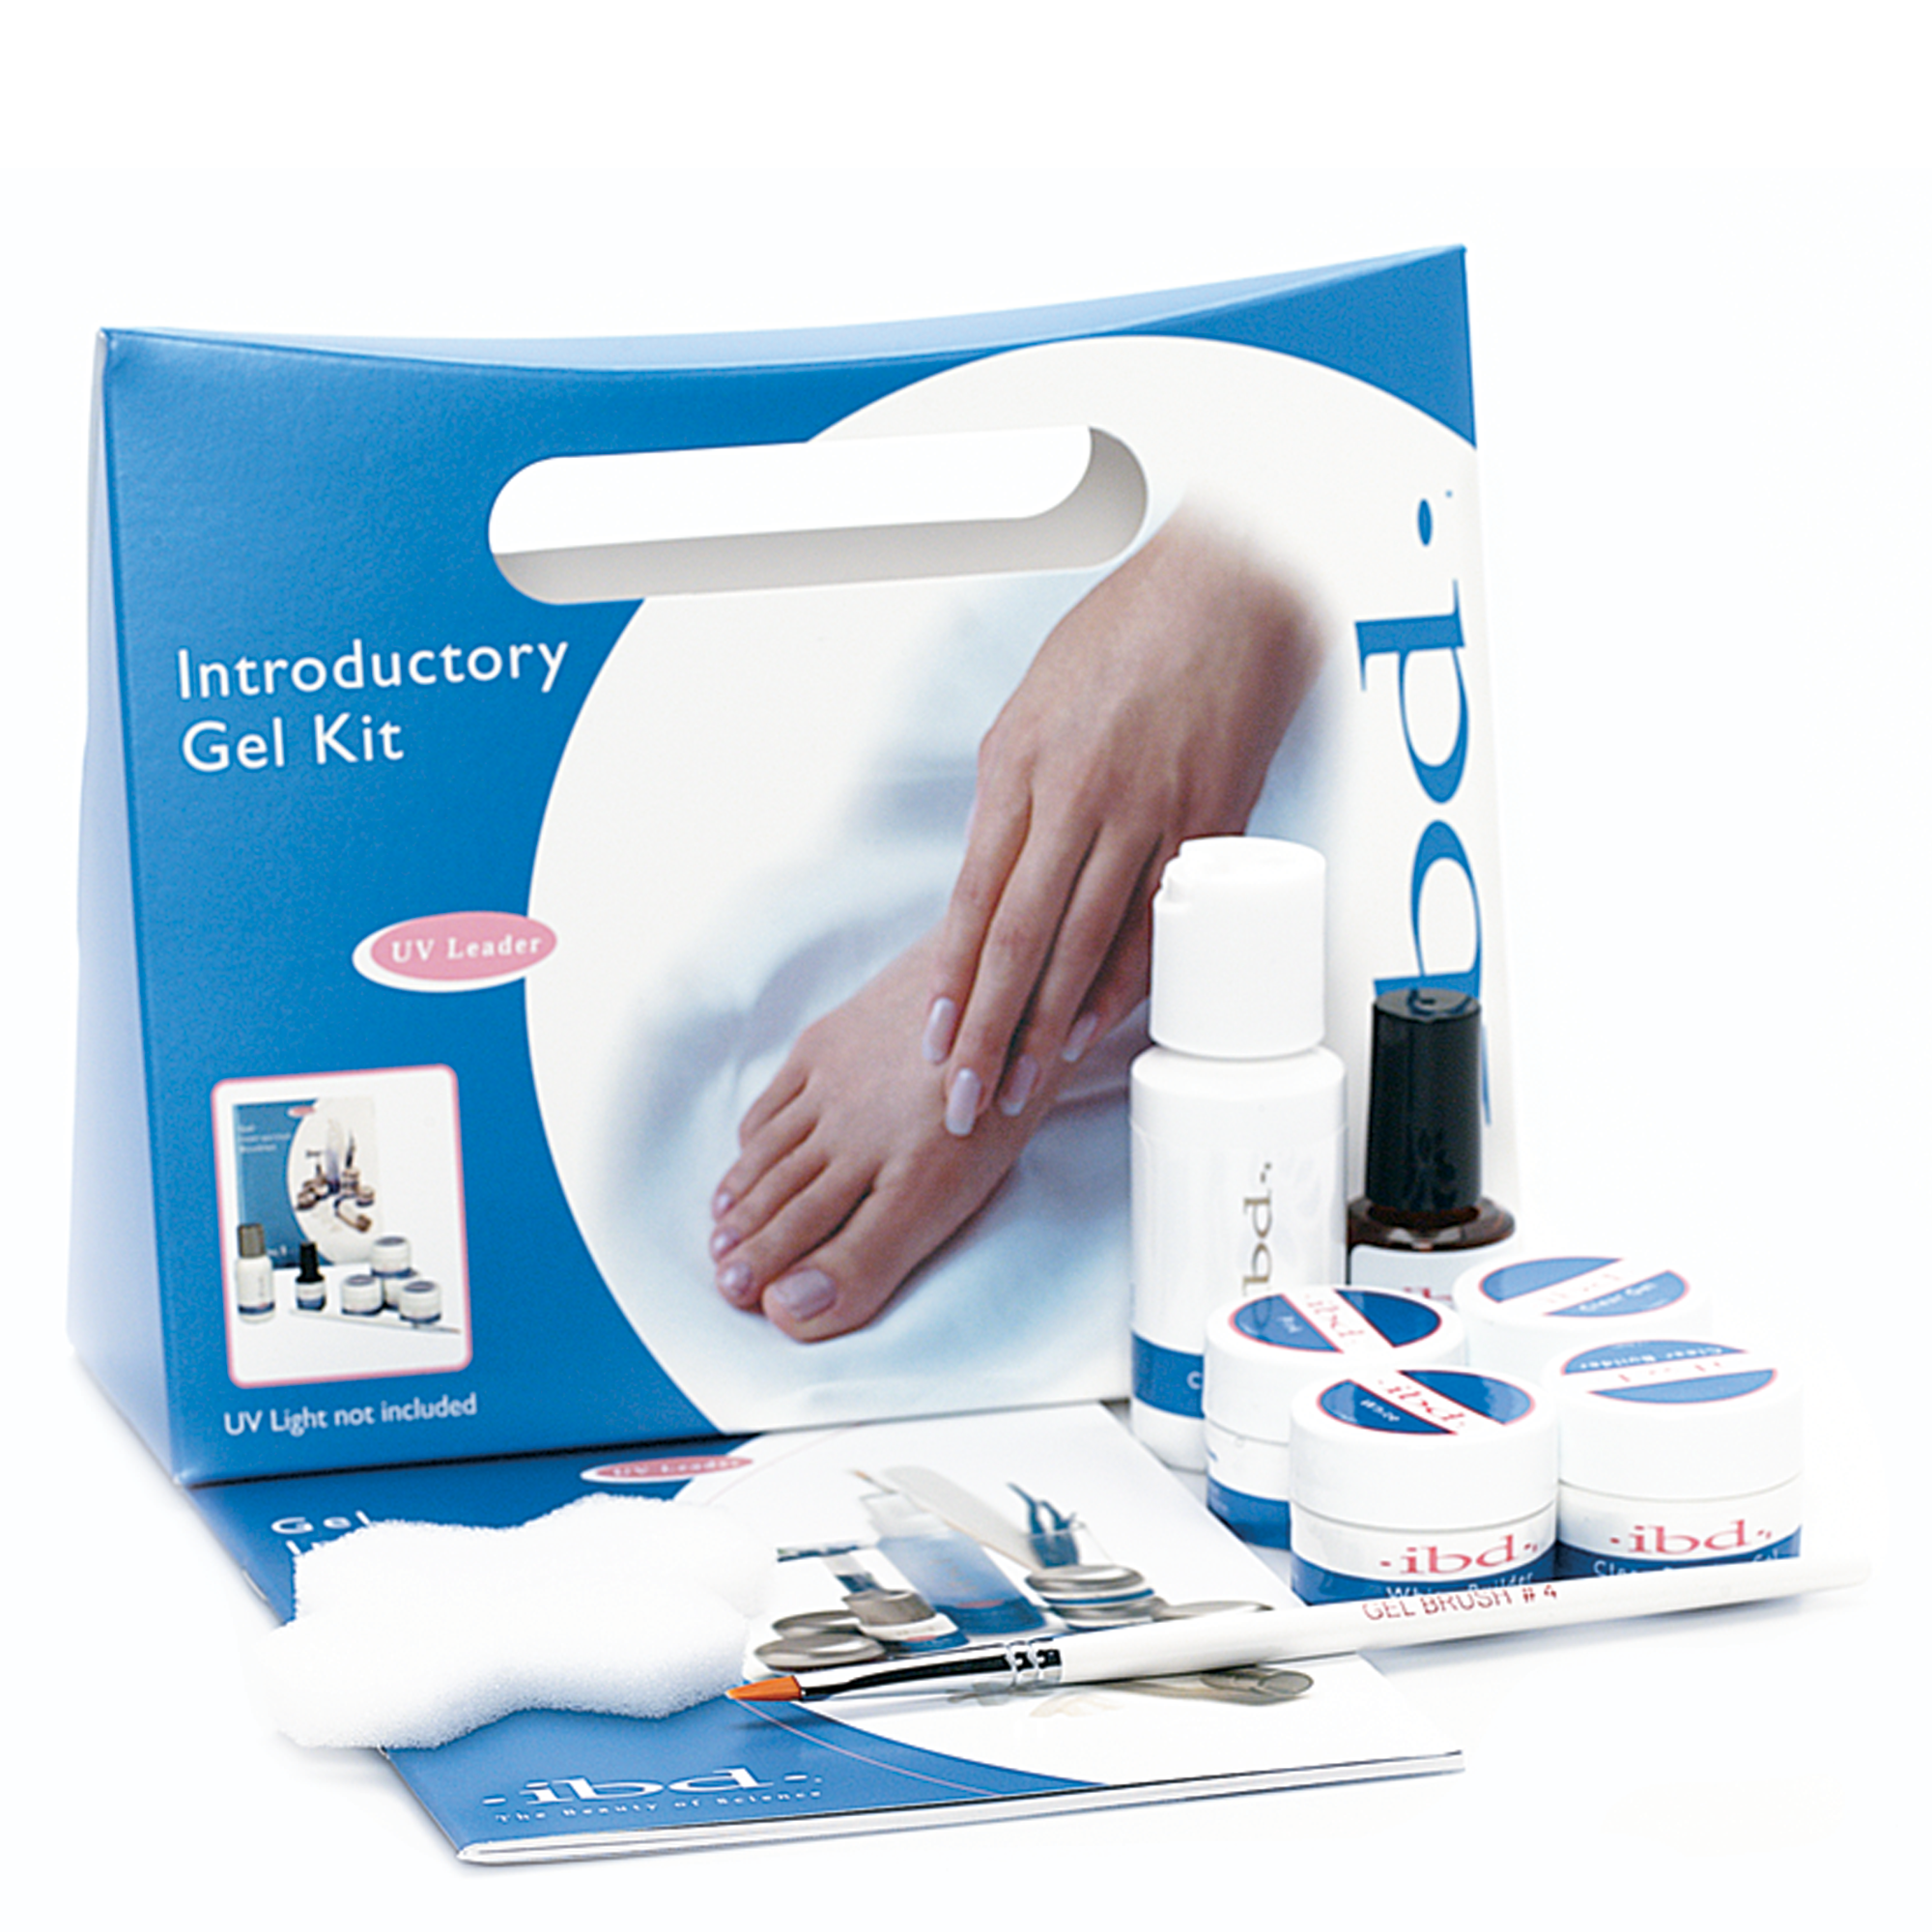 Introductory Gel Kit